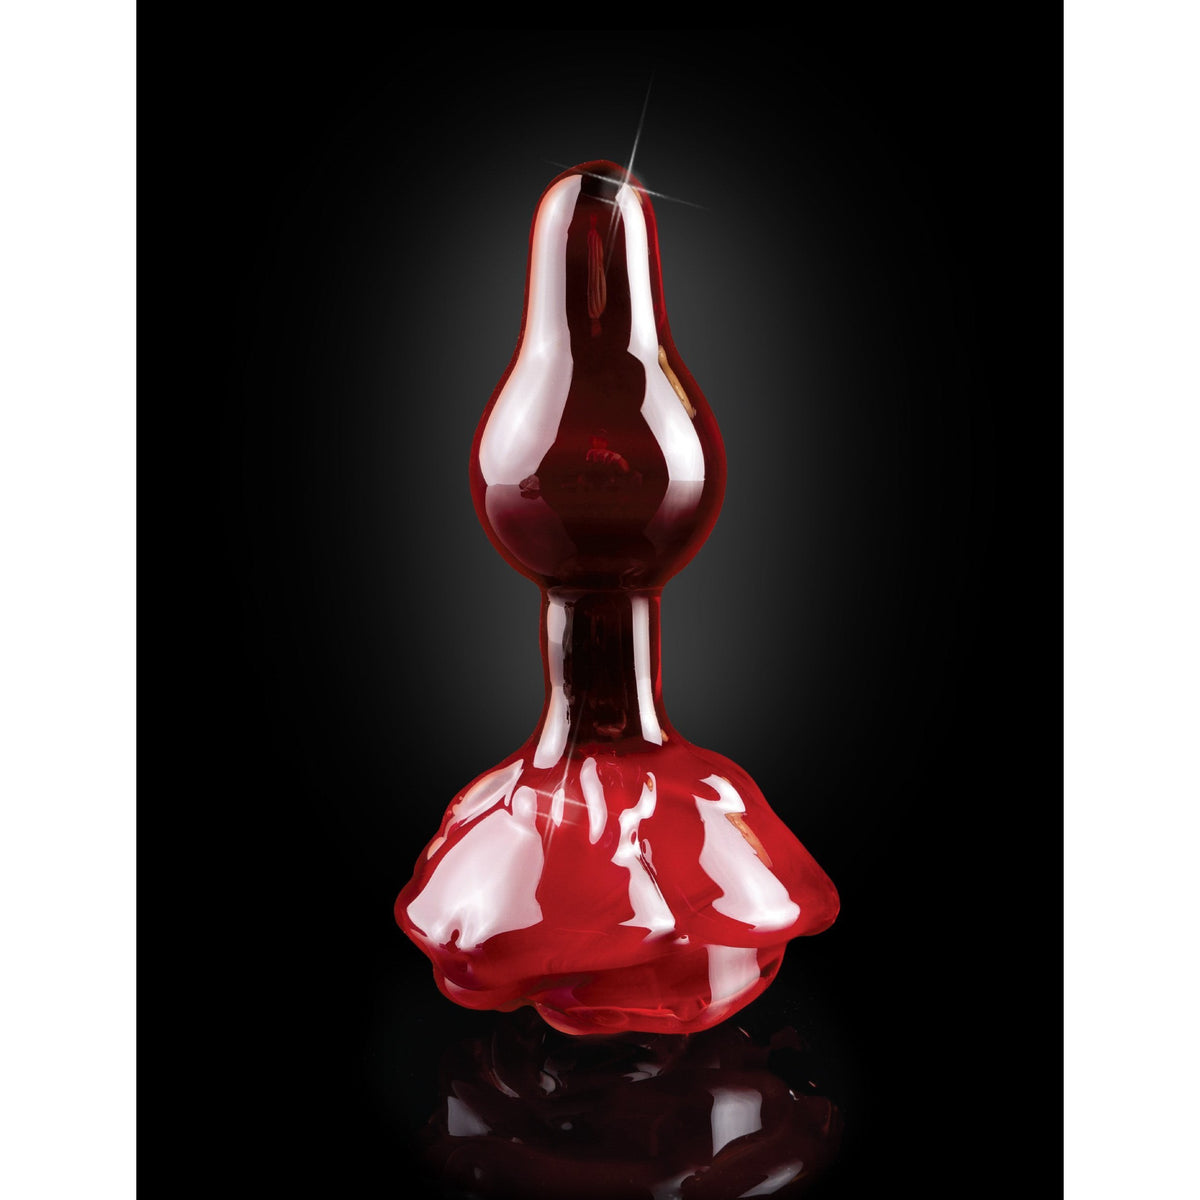 Pipedream - Icicles No 76 Hand Blown Massager (Red) PD1658 CherryAffairs